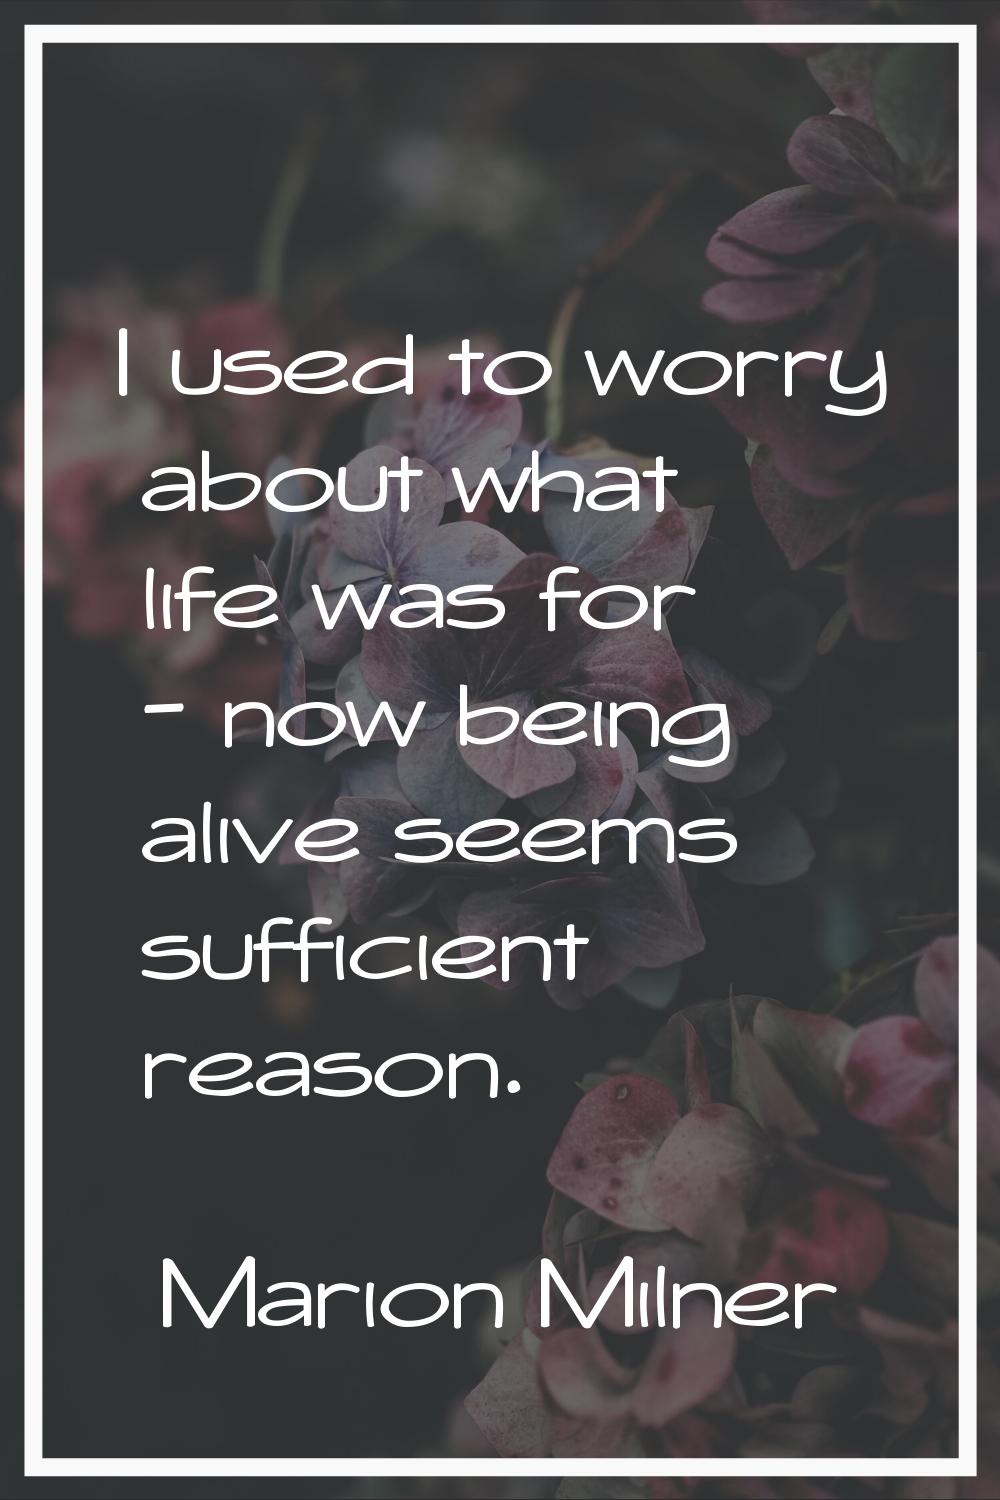 I used to worry about what life was for - now being alive seems sufficient reason.